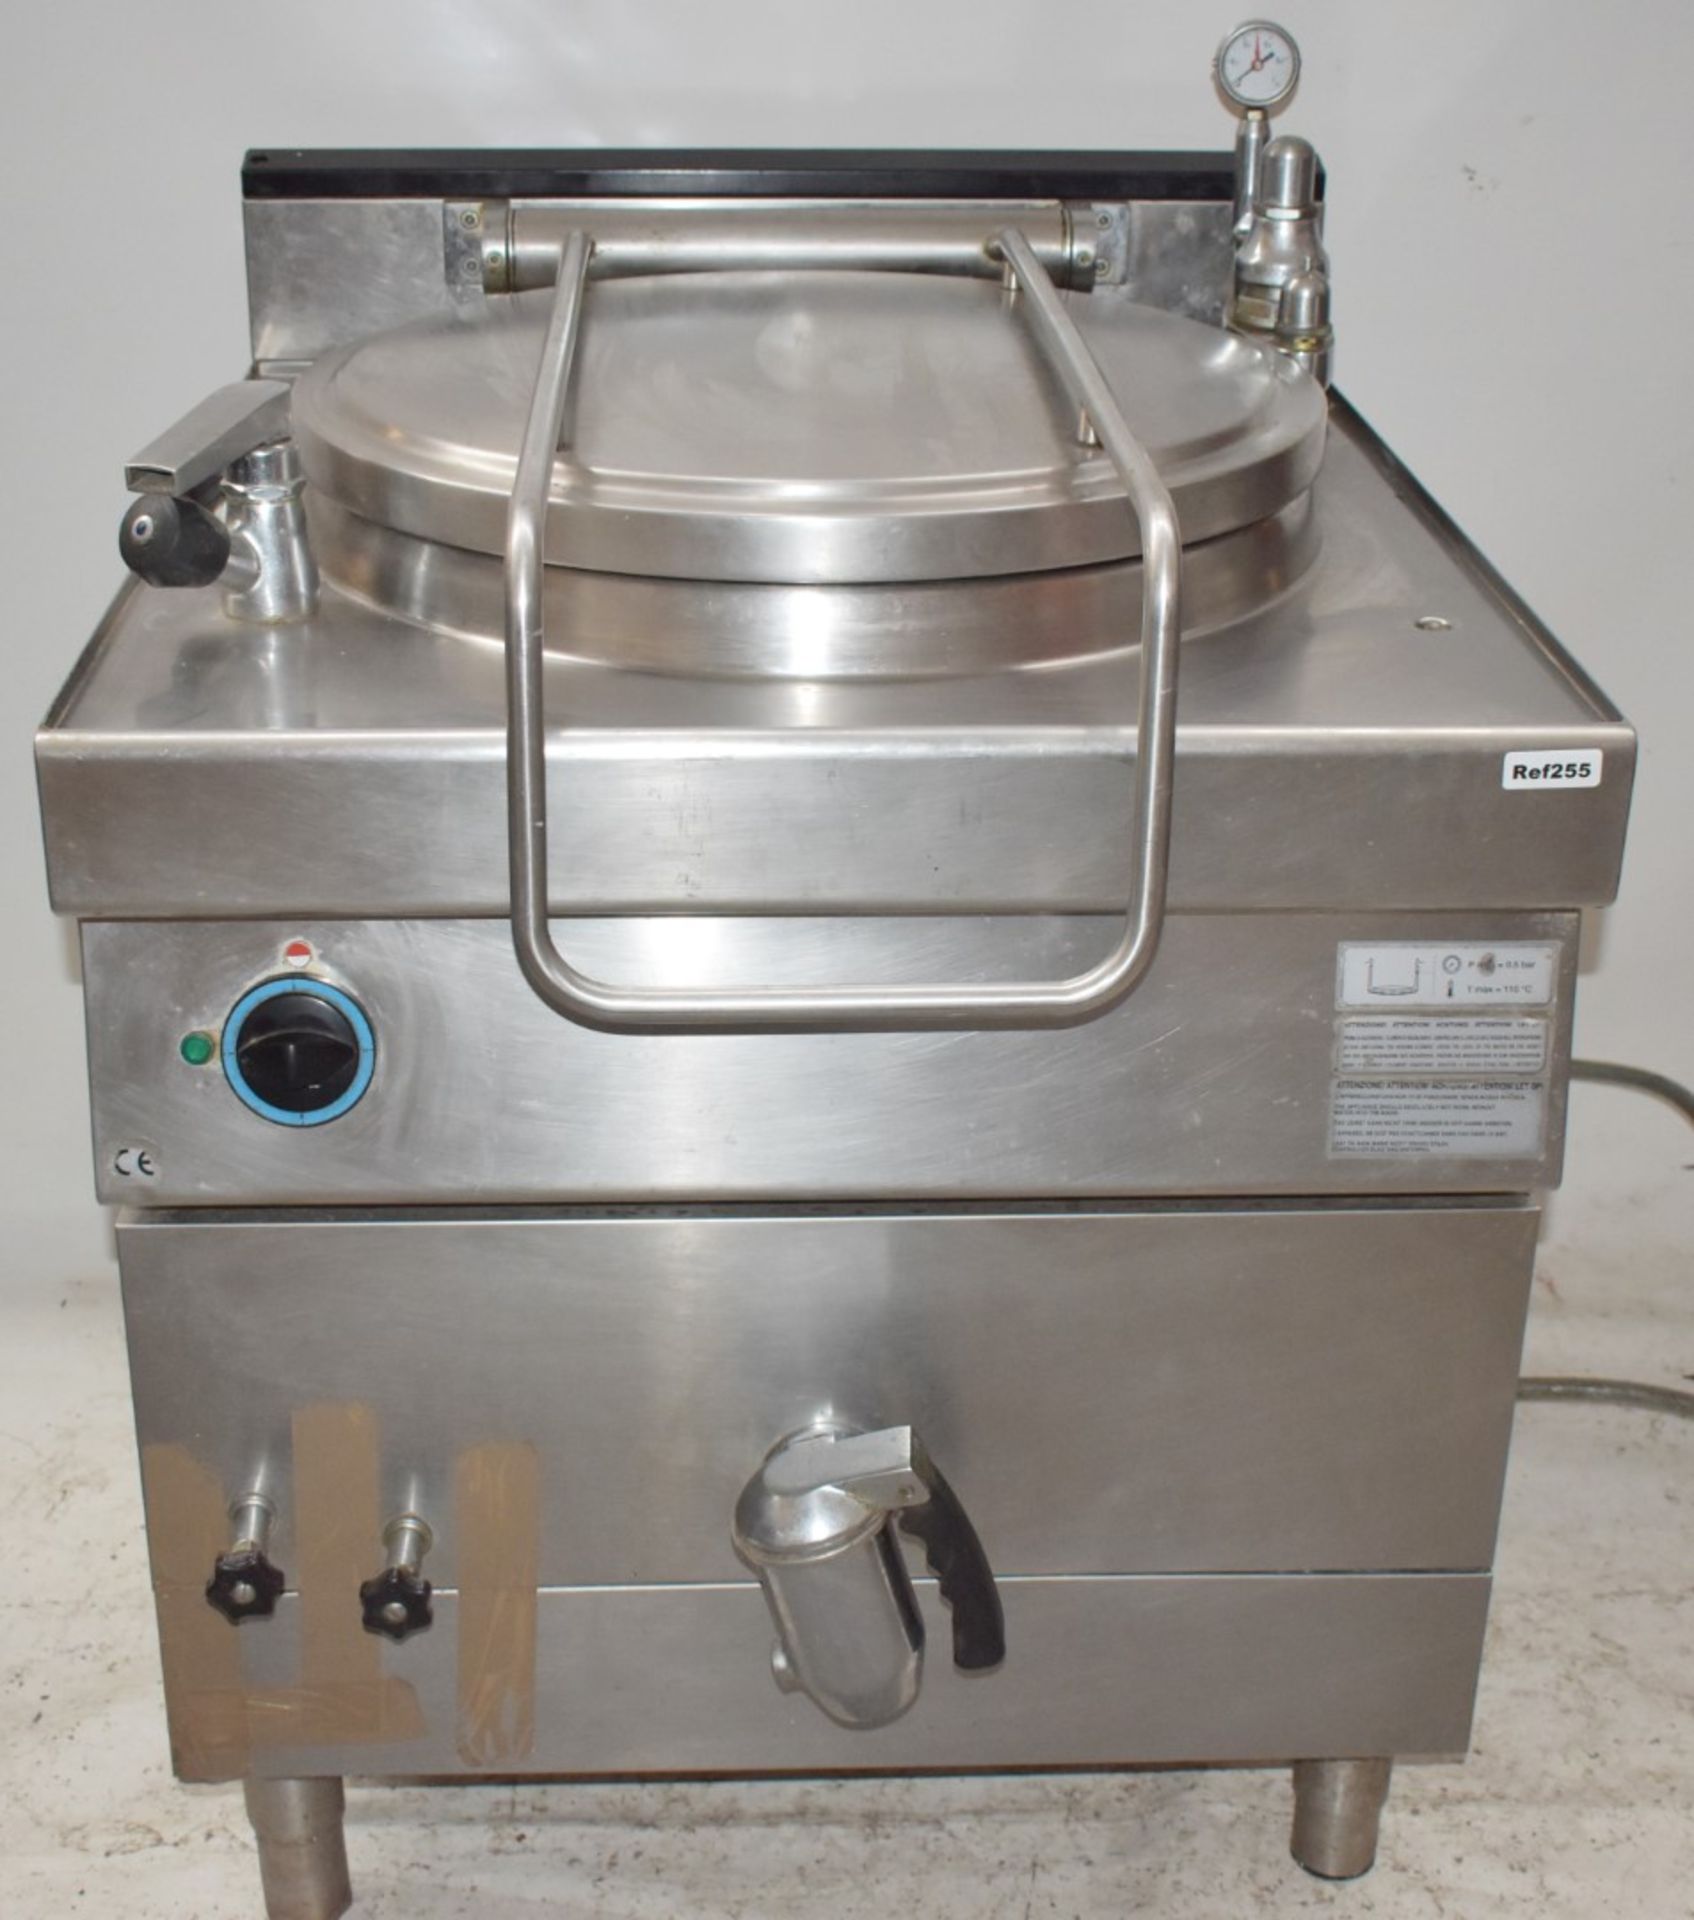 1 x Commercial Free Standing Pressure Cooker With Stainless Steel Body and Chamber - 3 Phase Power -